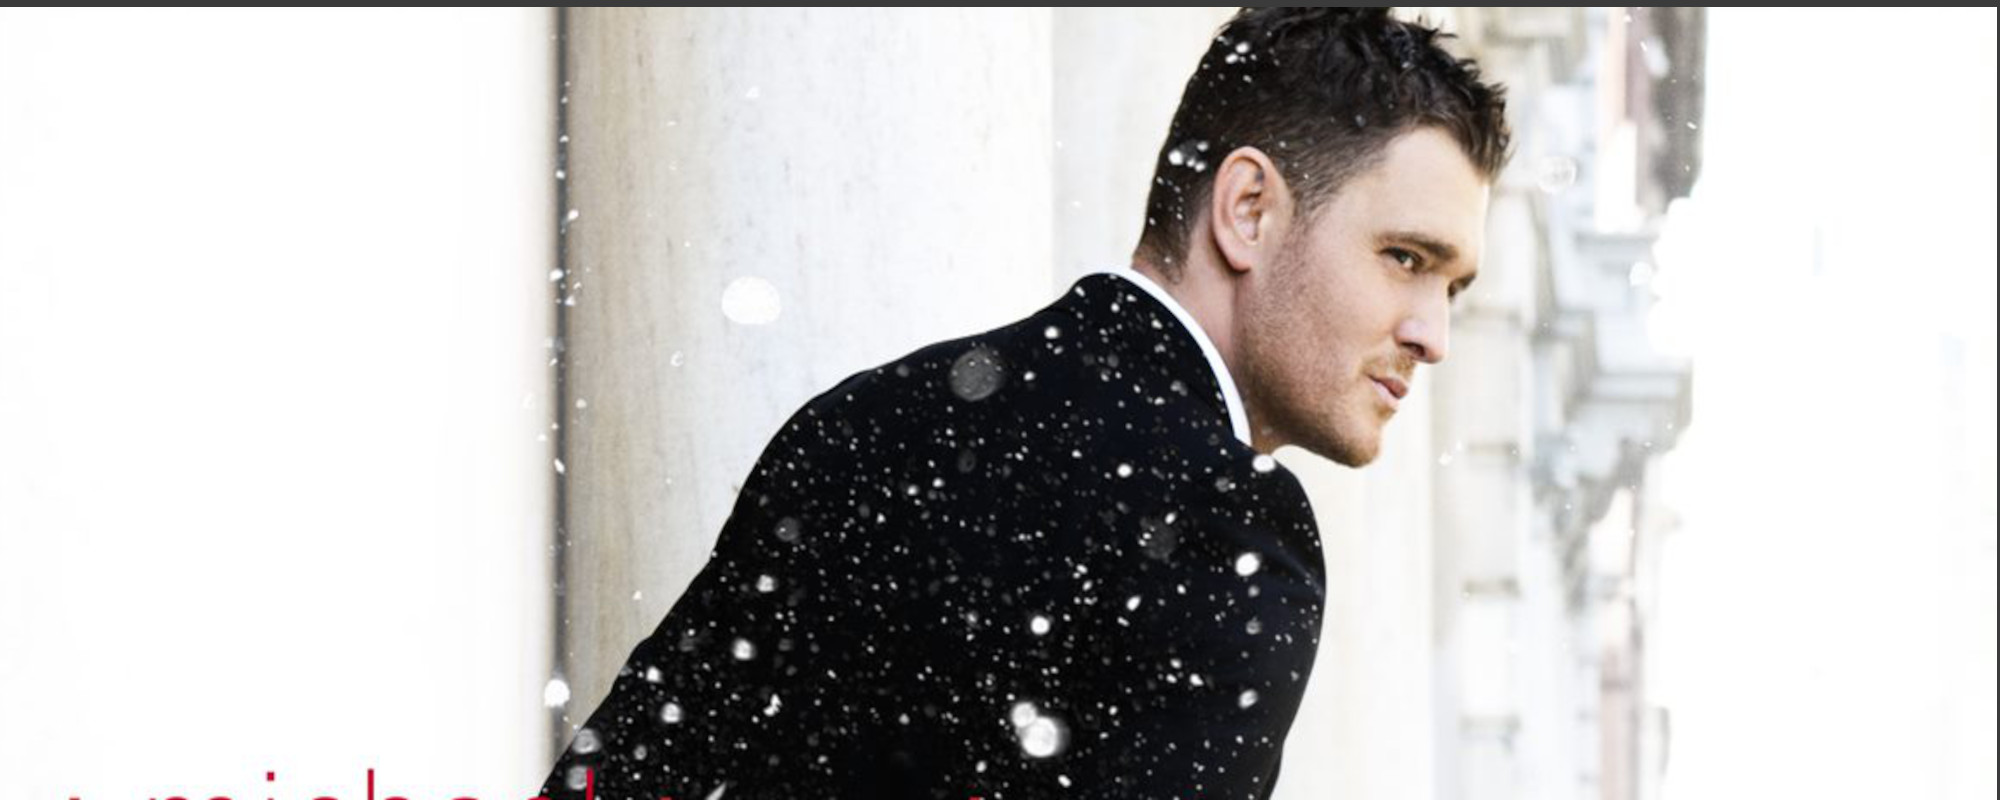 Michael Bublé Goes ‘HIGHER’ with Cover of Olivia Rodrigo’s “drivers license”